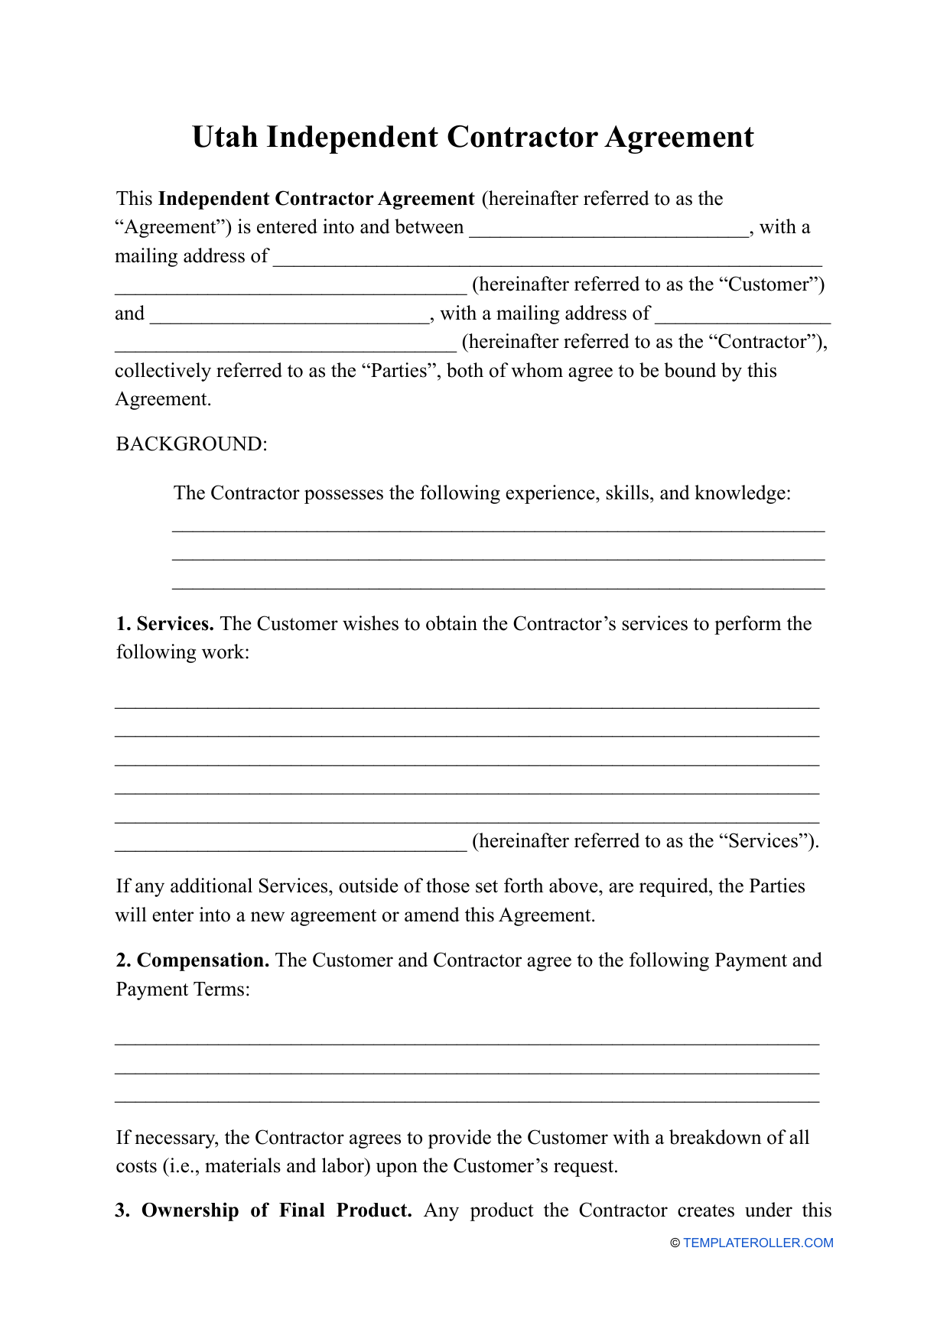 Independent Contractor Agreement Template - Utah, Page 1